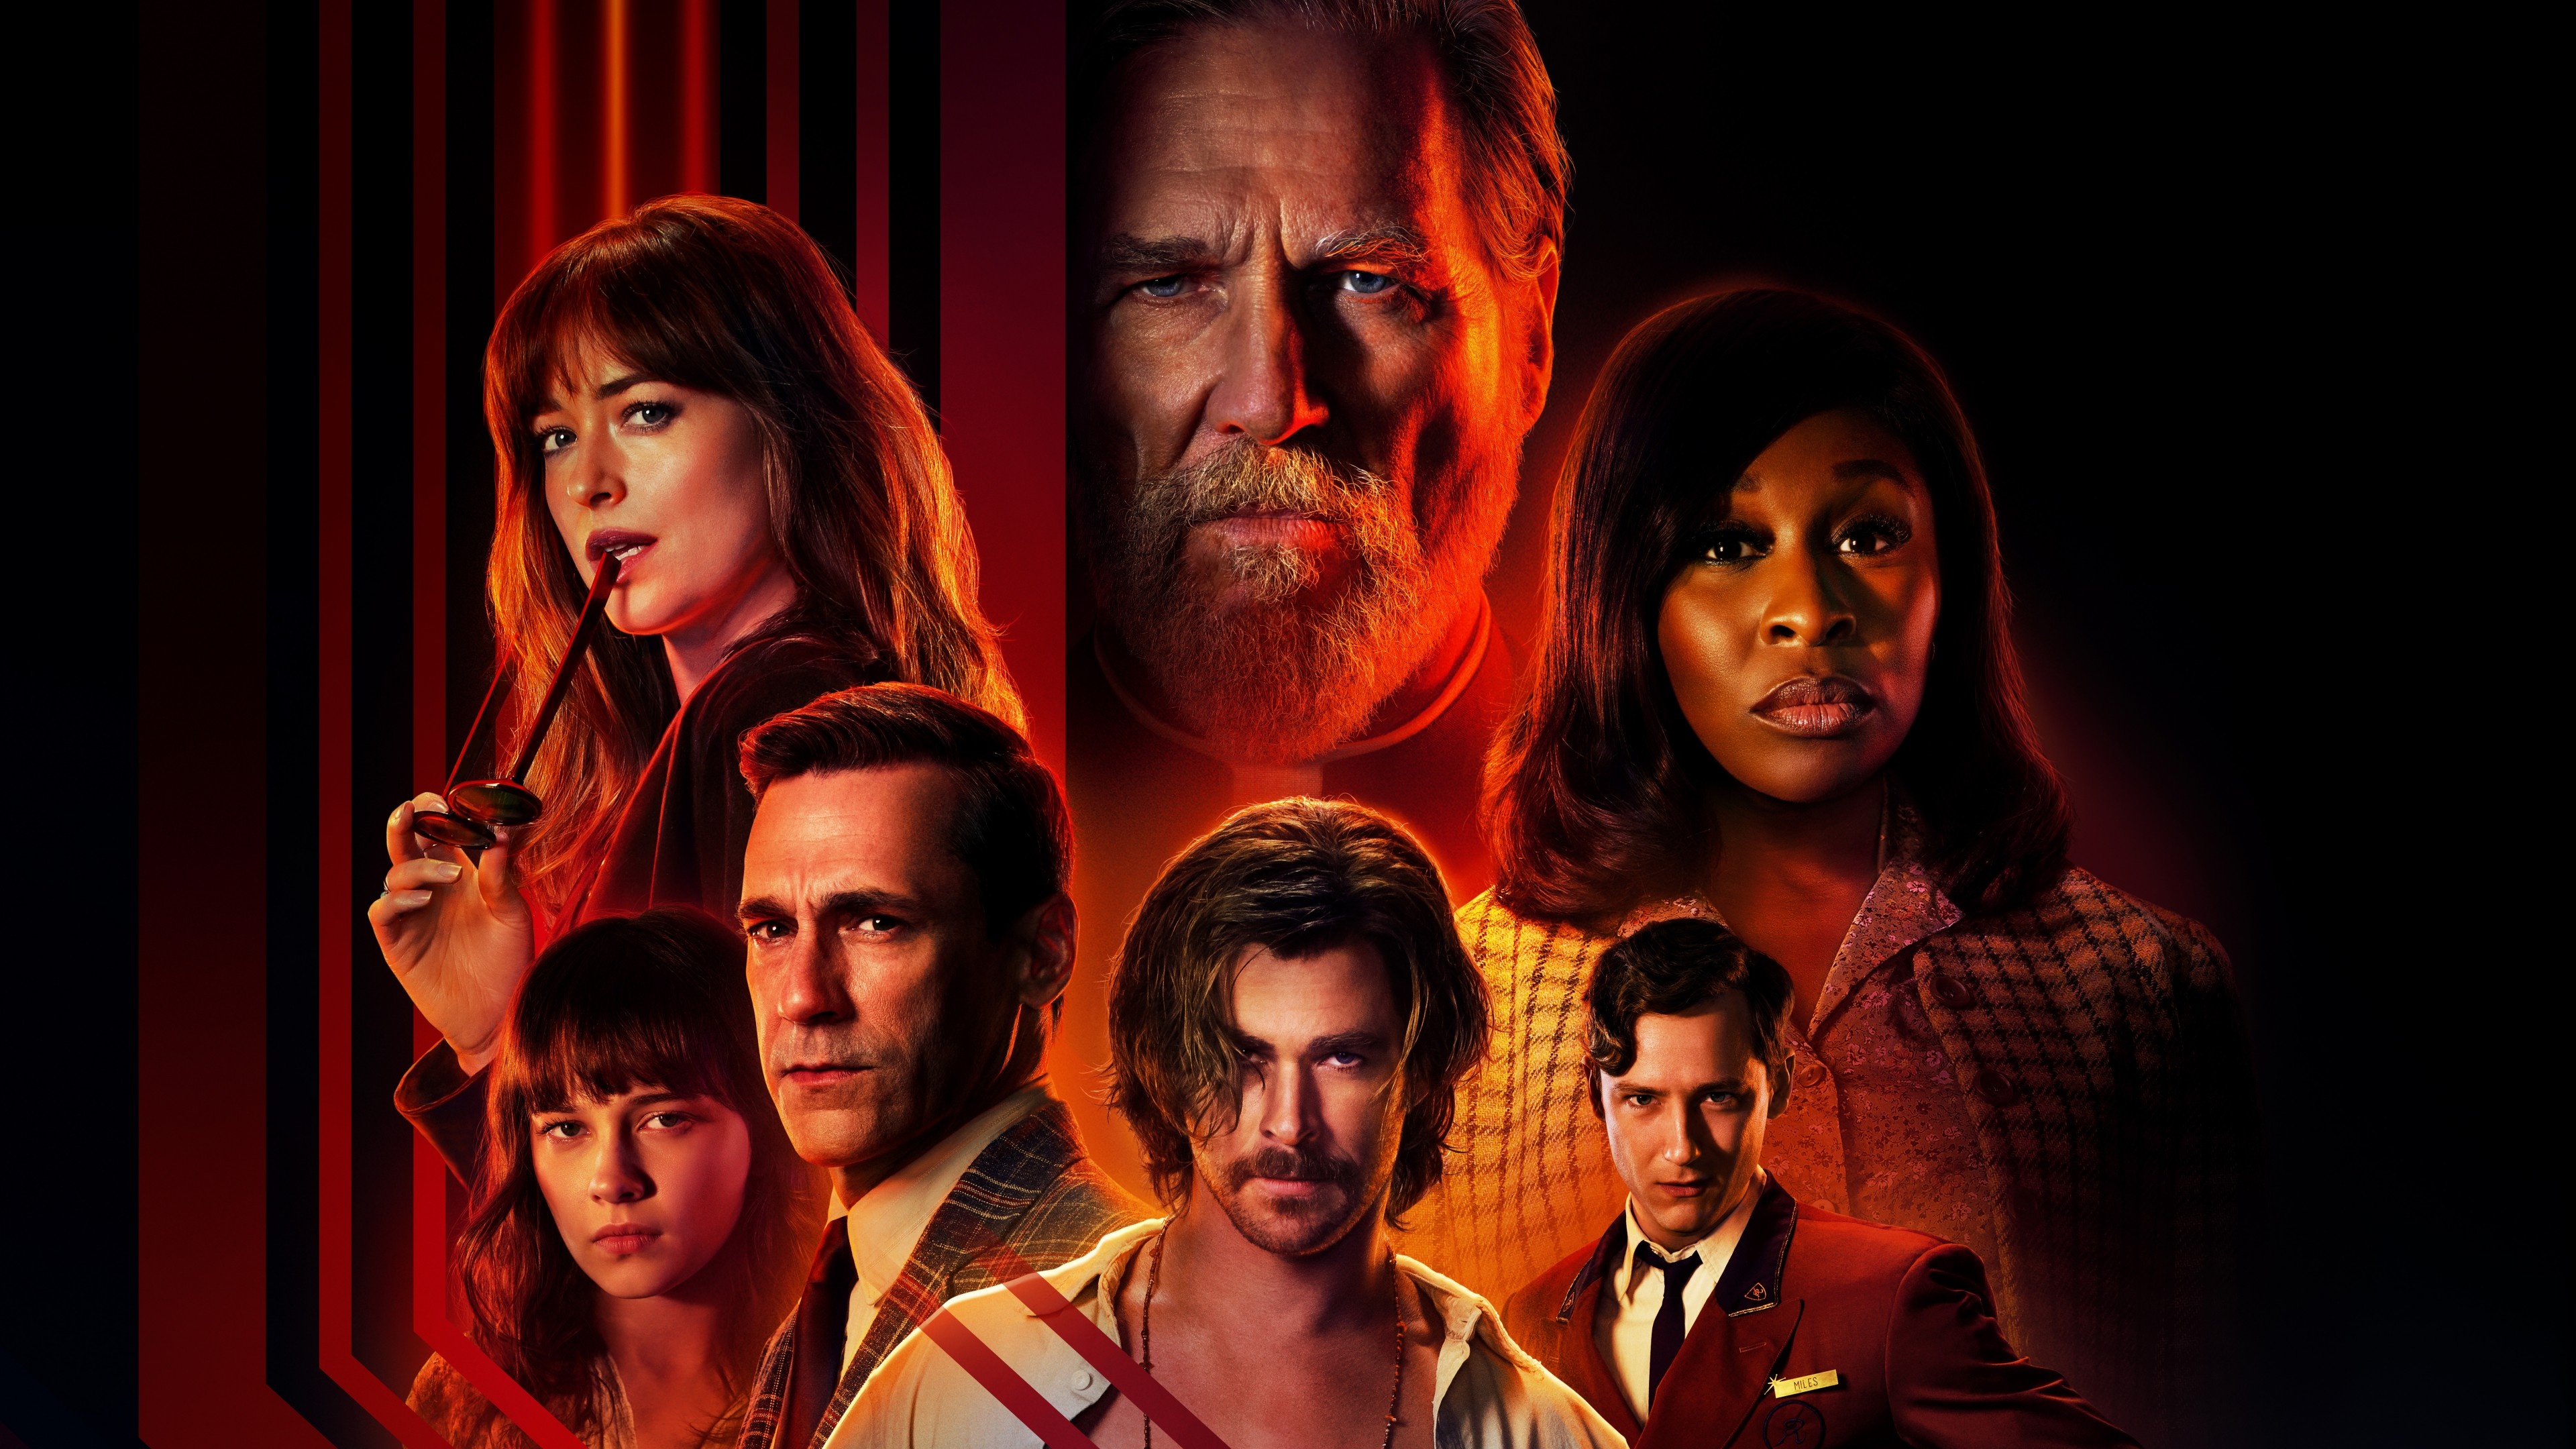 Bad Times at the El Royale, Striking poster, Immersive movie experience, High-resolution, 3840x2160 4K Desktop